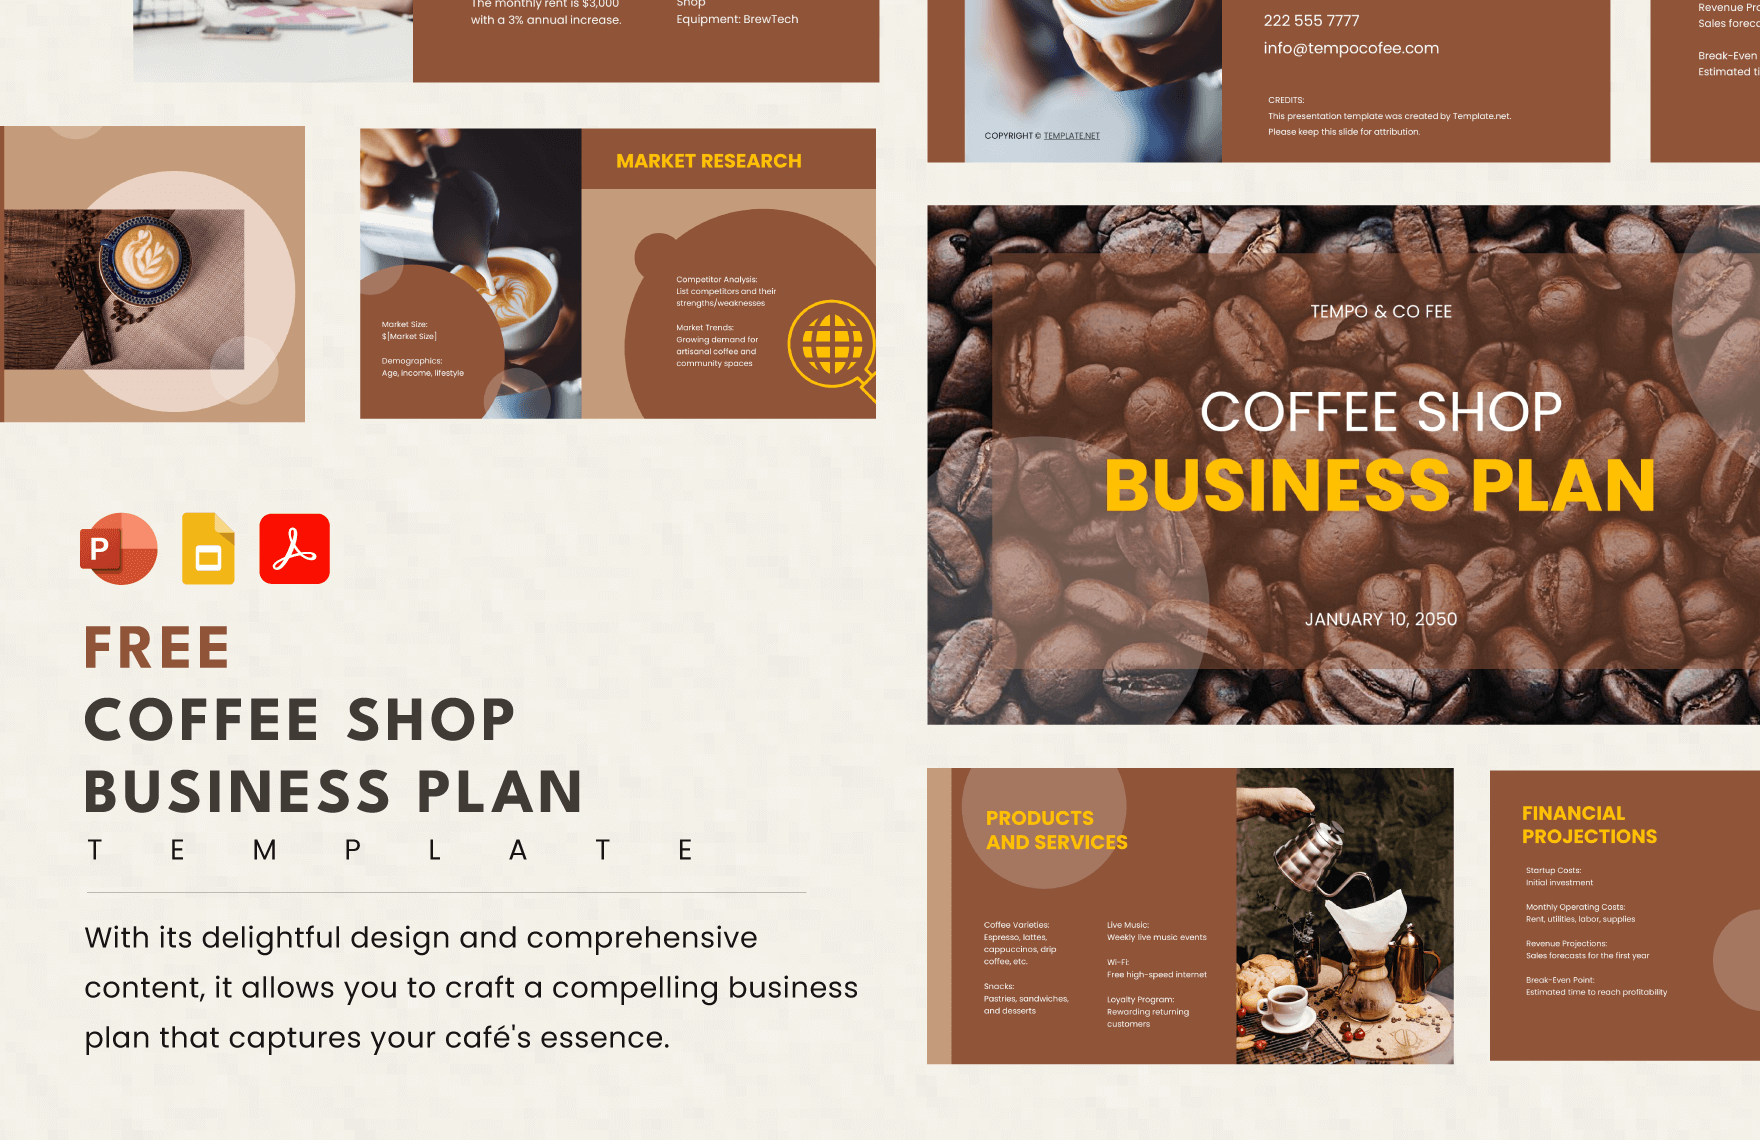 coffee shop business plan ppt free download